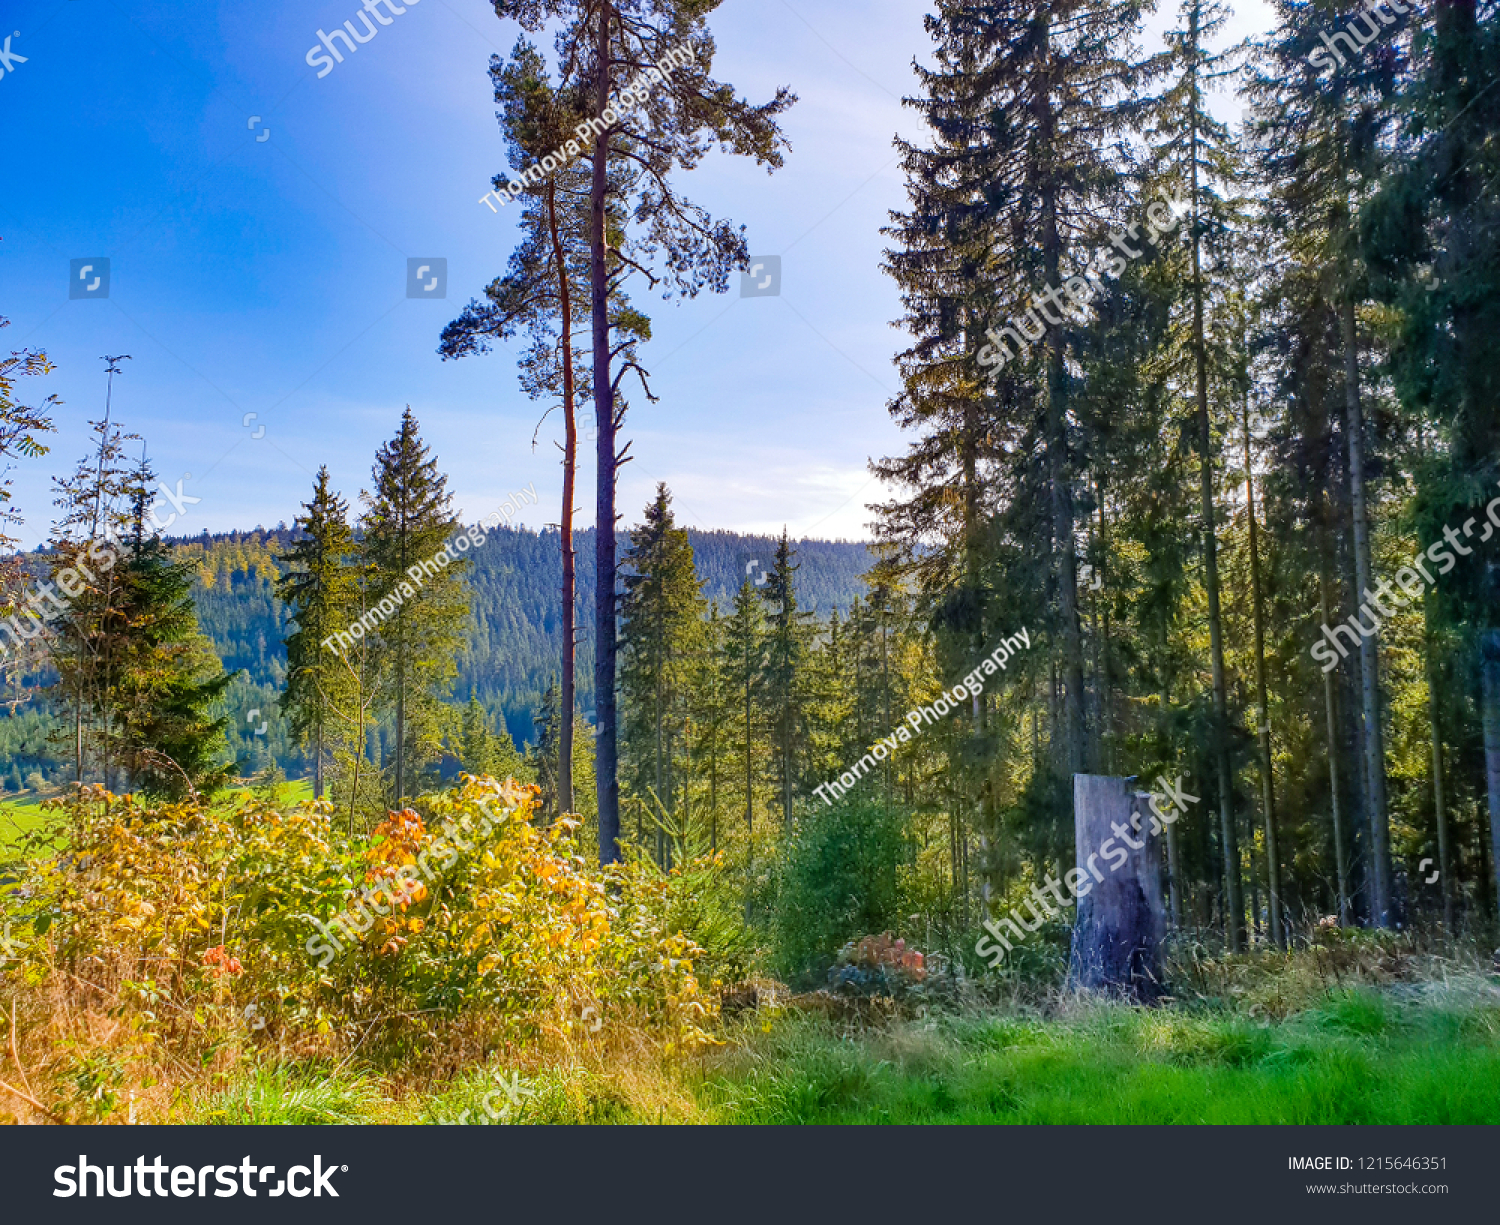 Black forest, Germany: green pine trees during the sunny day, the view on tree tops and blue sky #1215646351